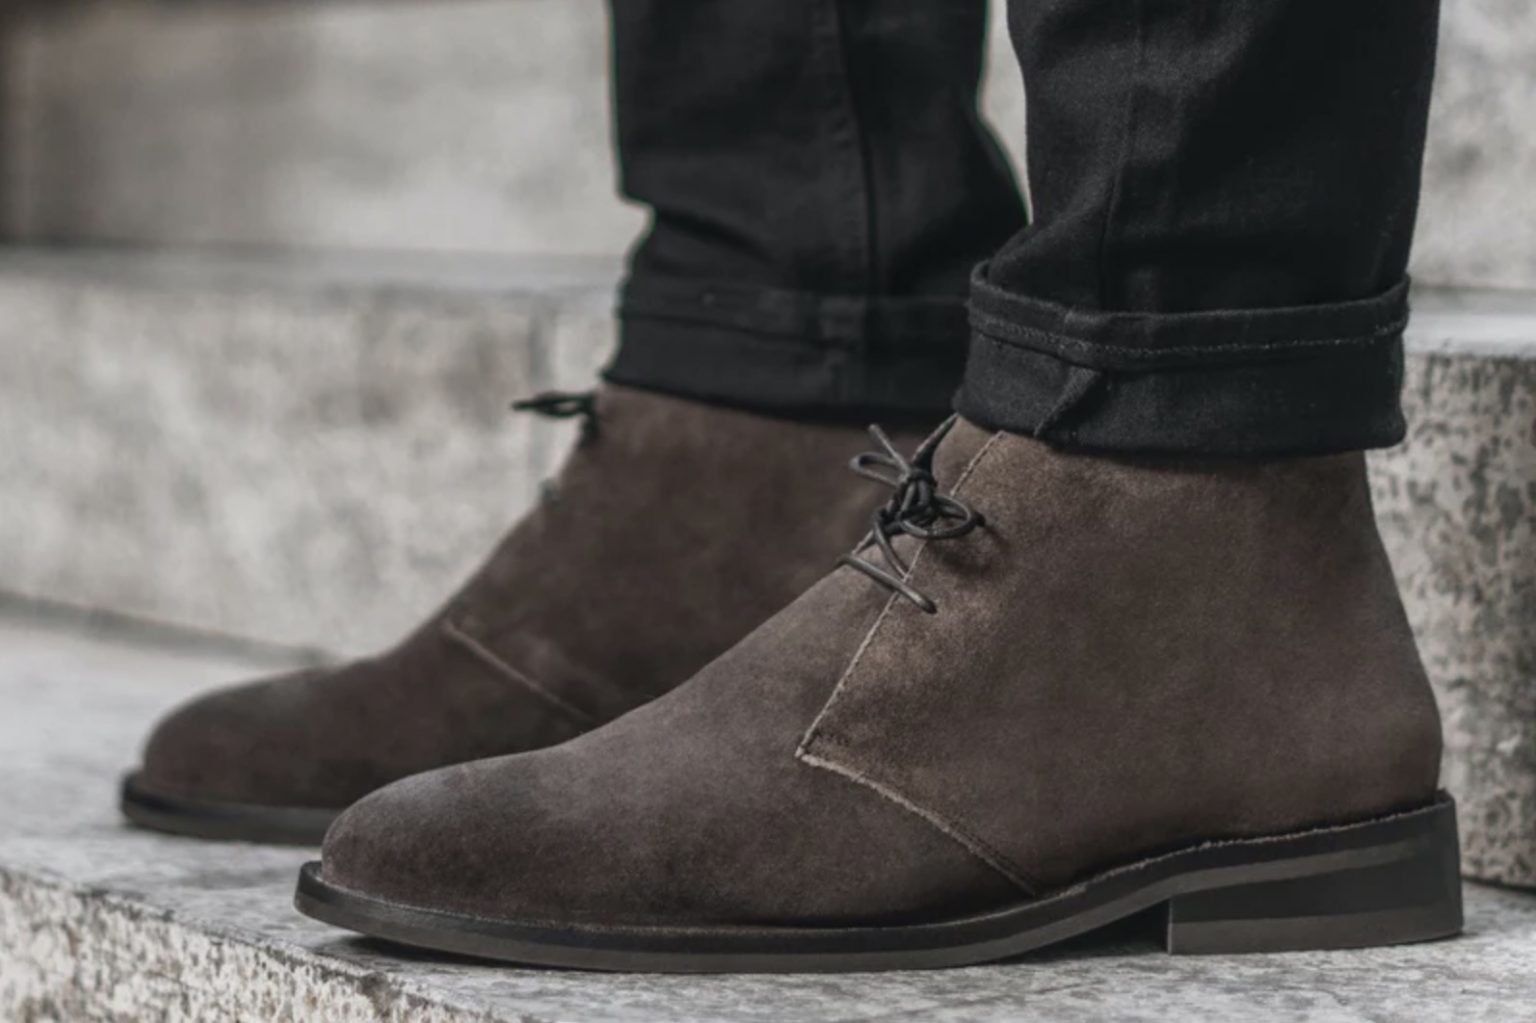 How to Wear Chukka Boots | 8 Styles For Every Guy - stridewise.com